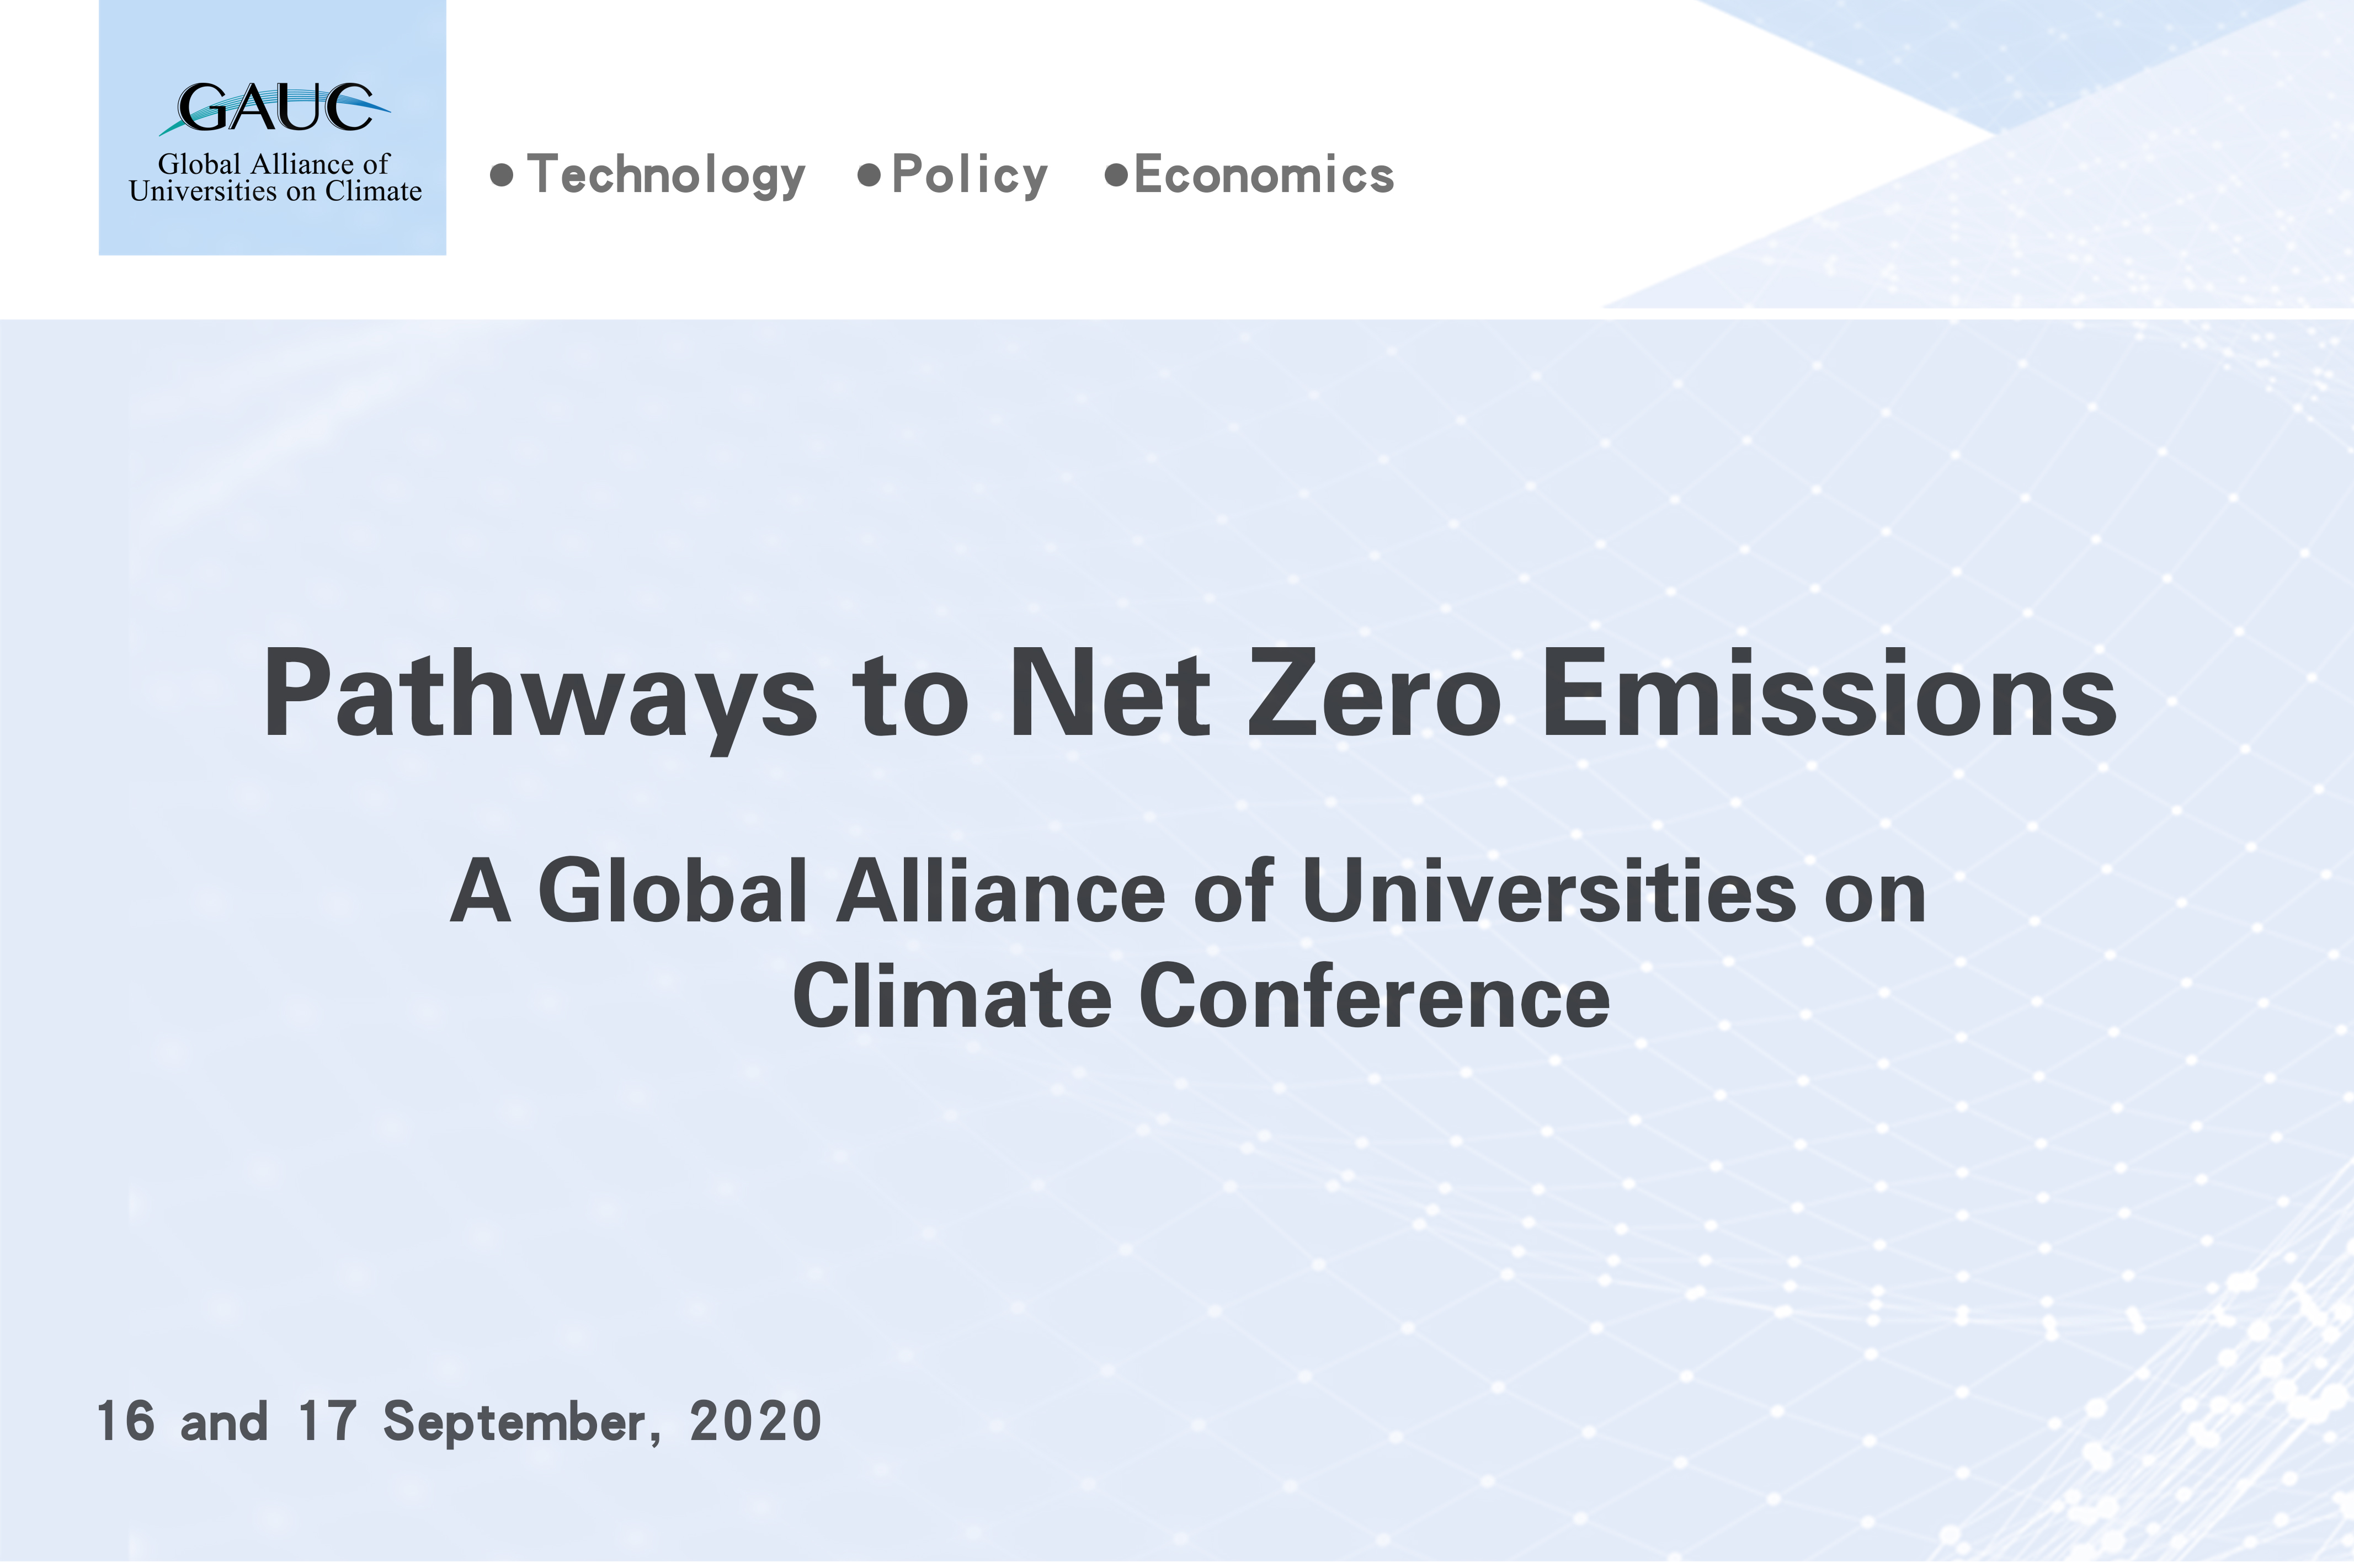 Climate experts call for rapid action to reach net zero emissions